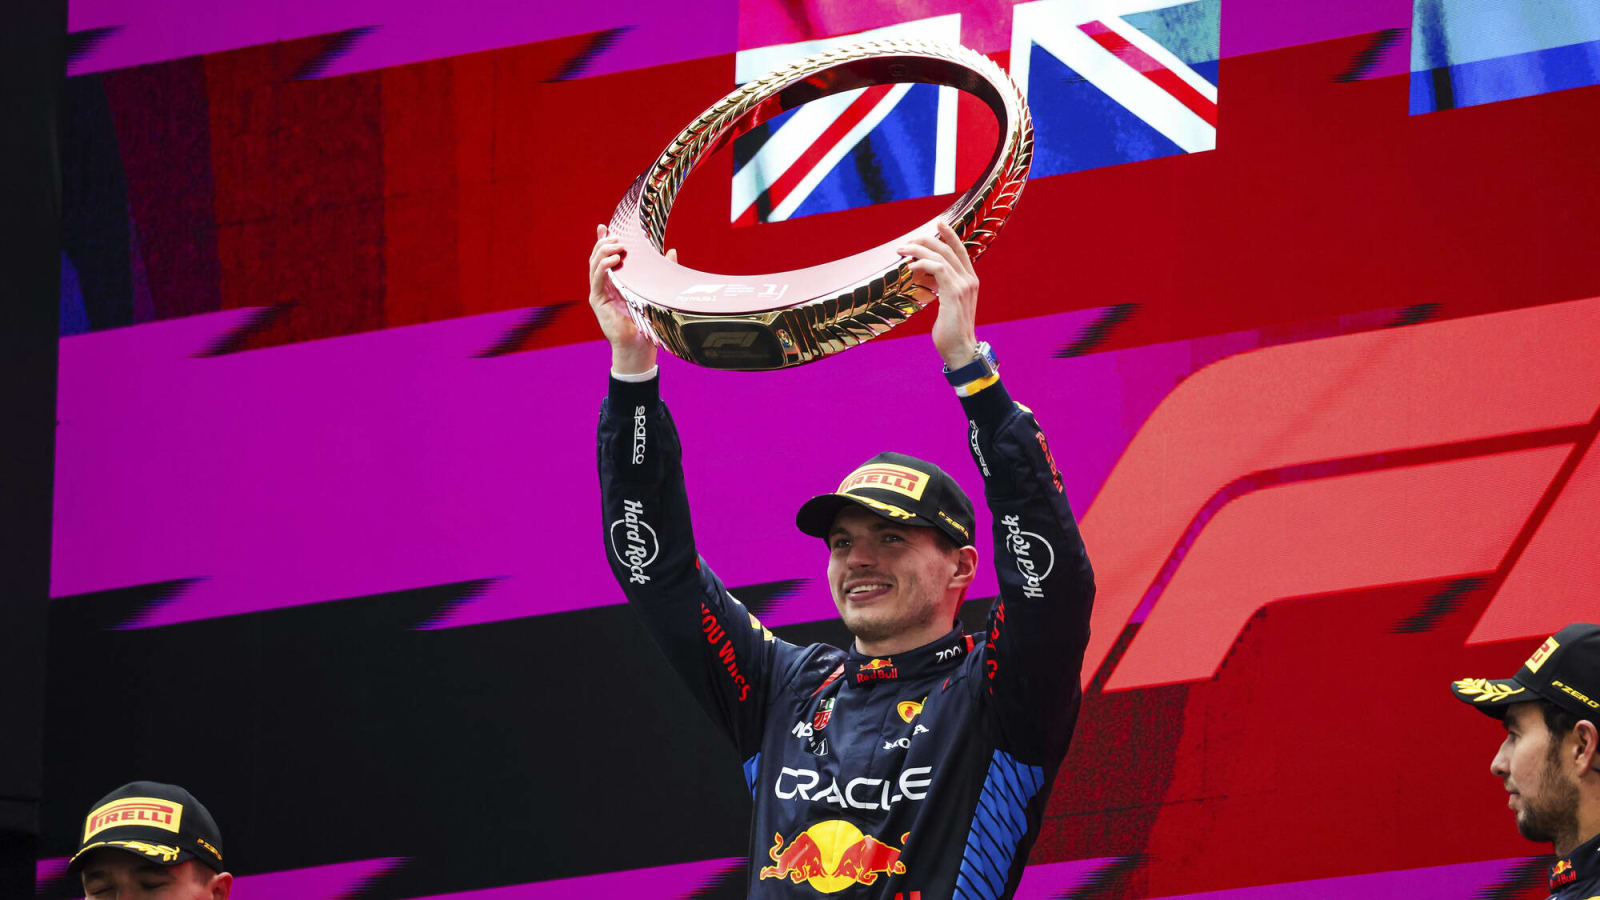 Axed Alpine boss claims F1 ‘can’t get rid of Max Verstappen’ amidst his ever-growing dominance over the sport